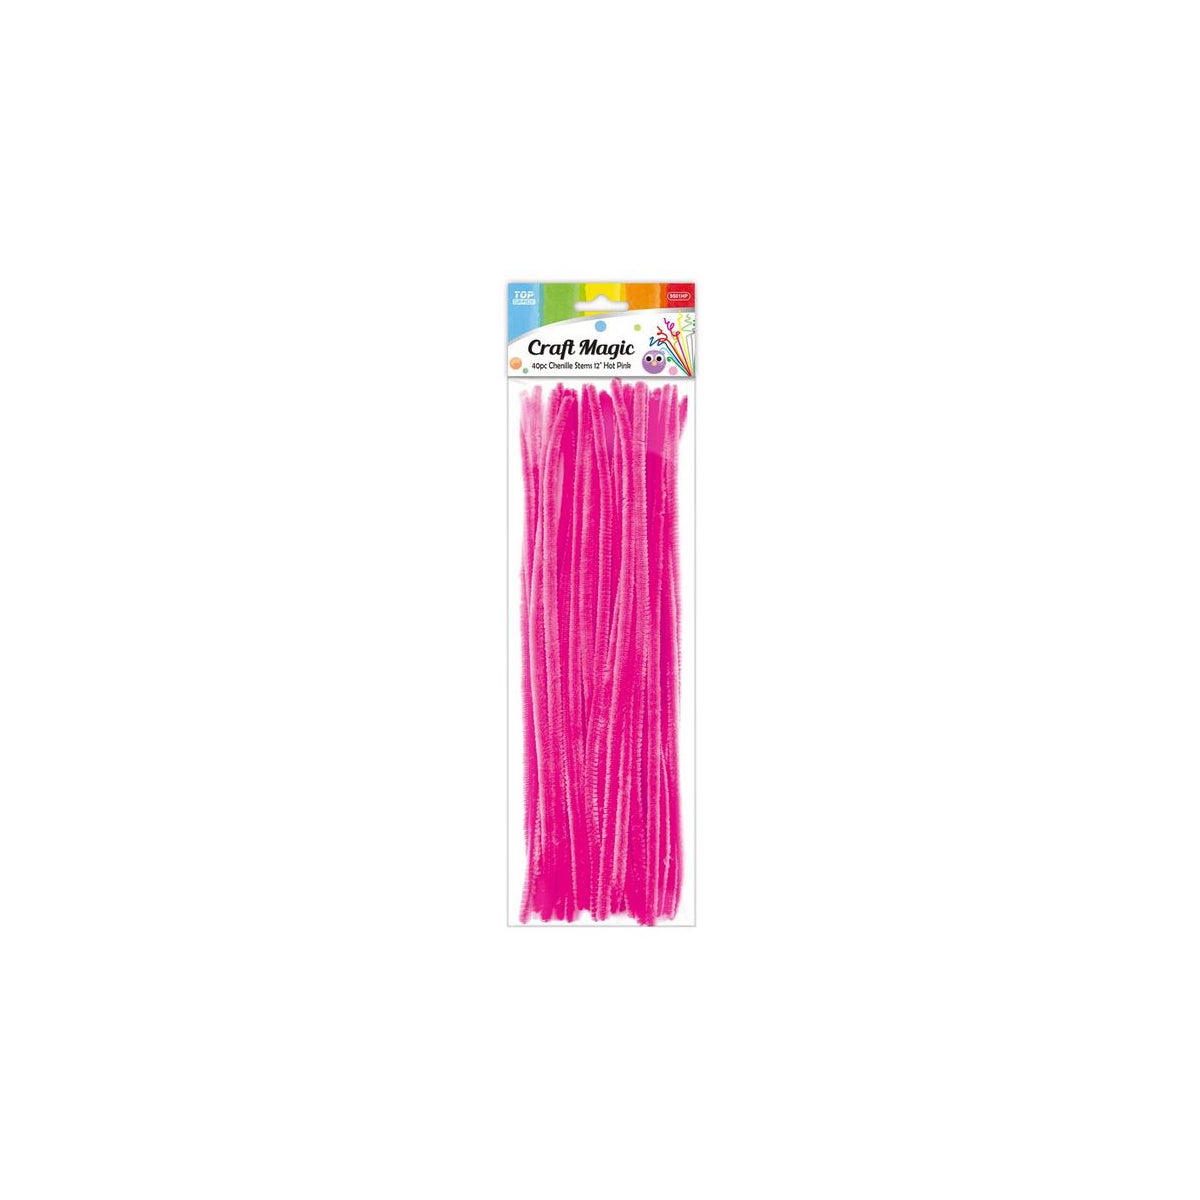 PIPE CLEANER: 40 PK, 12 HOT PINK #97679/9501HP (PK 12/144) - crafts